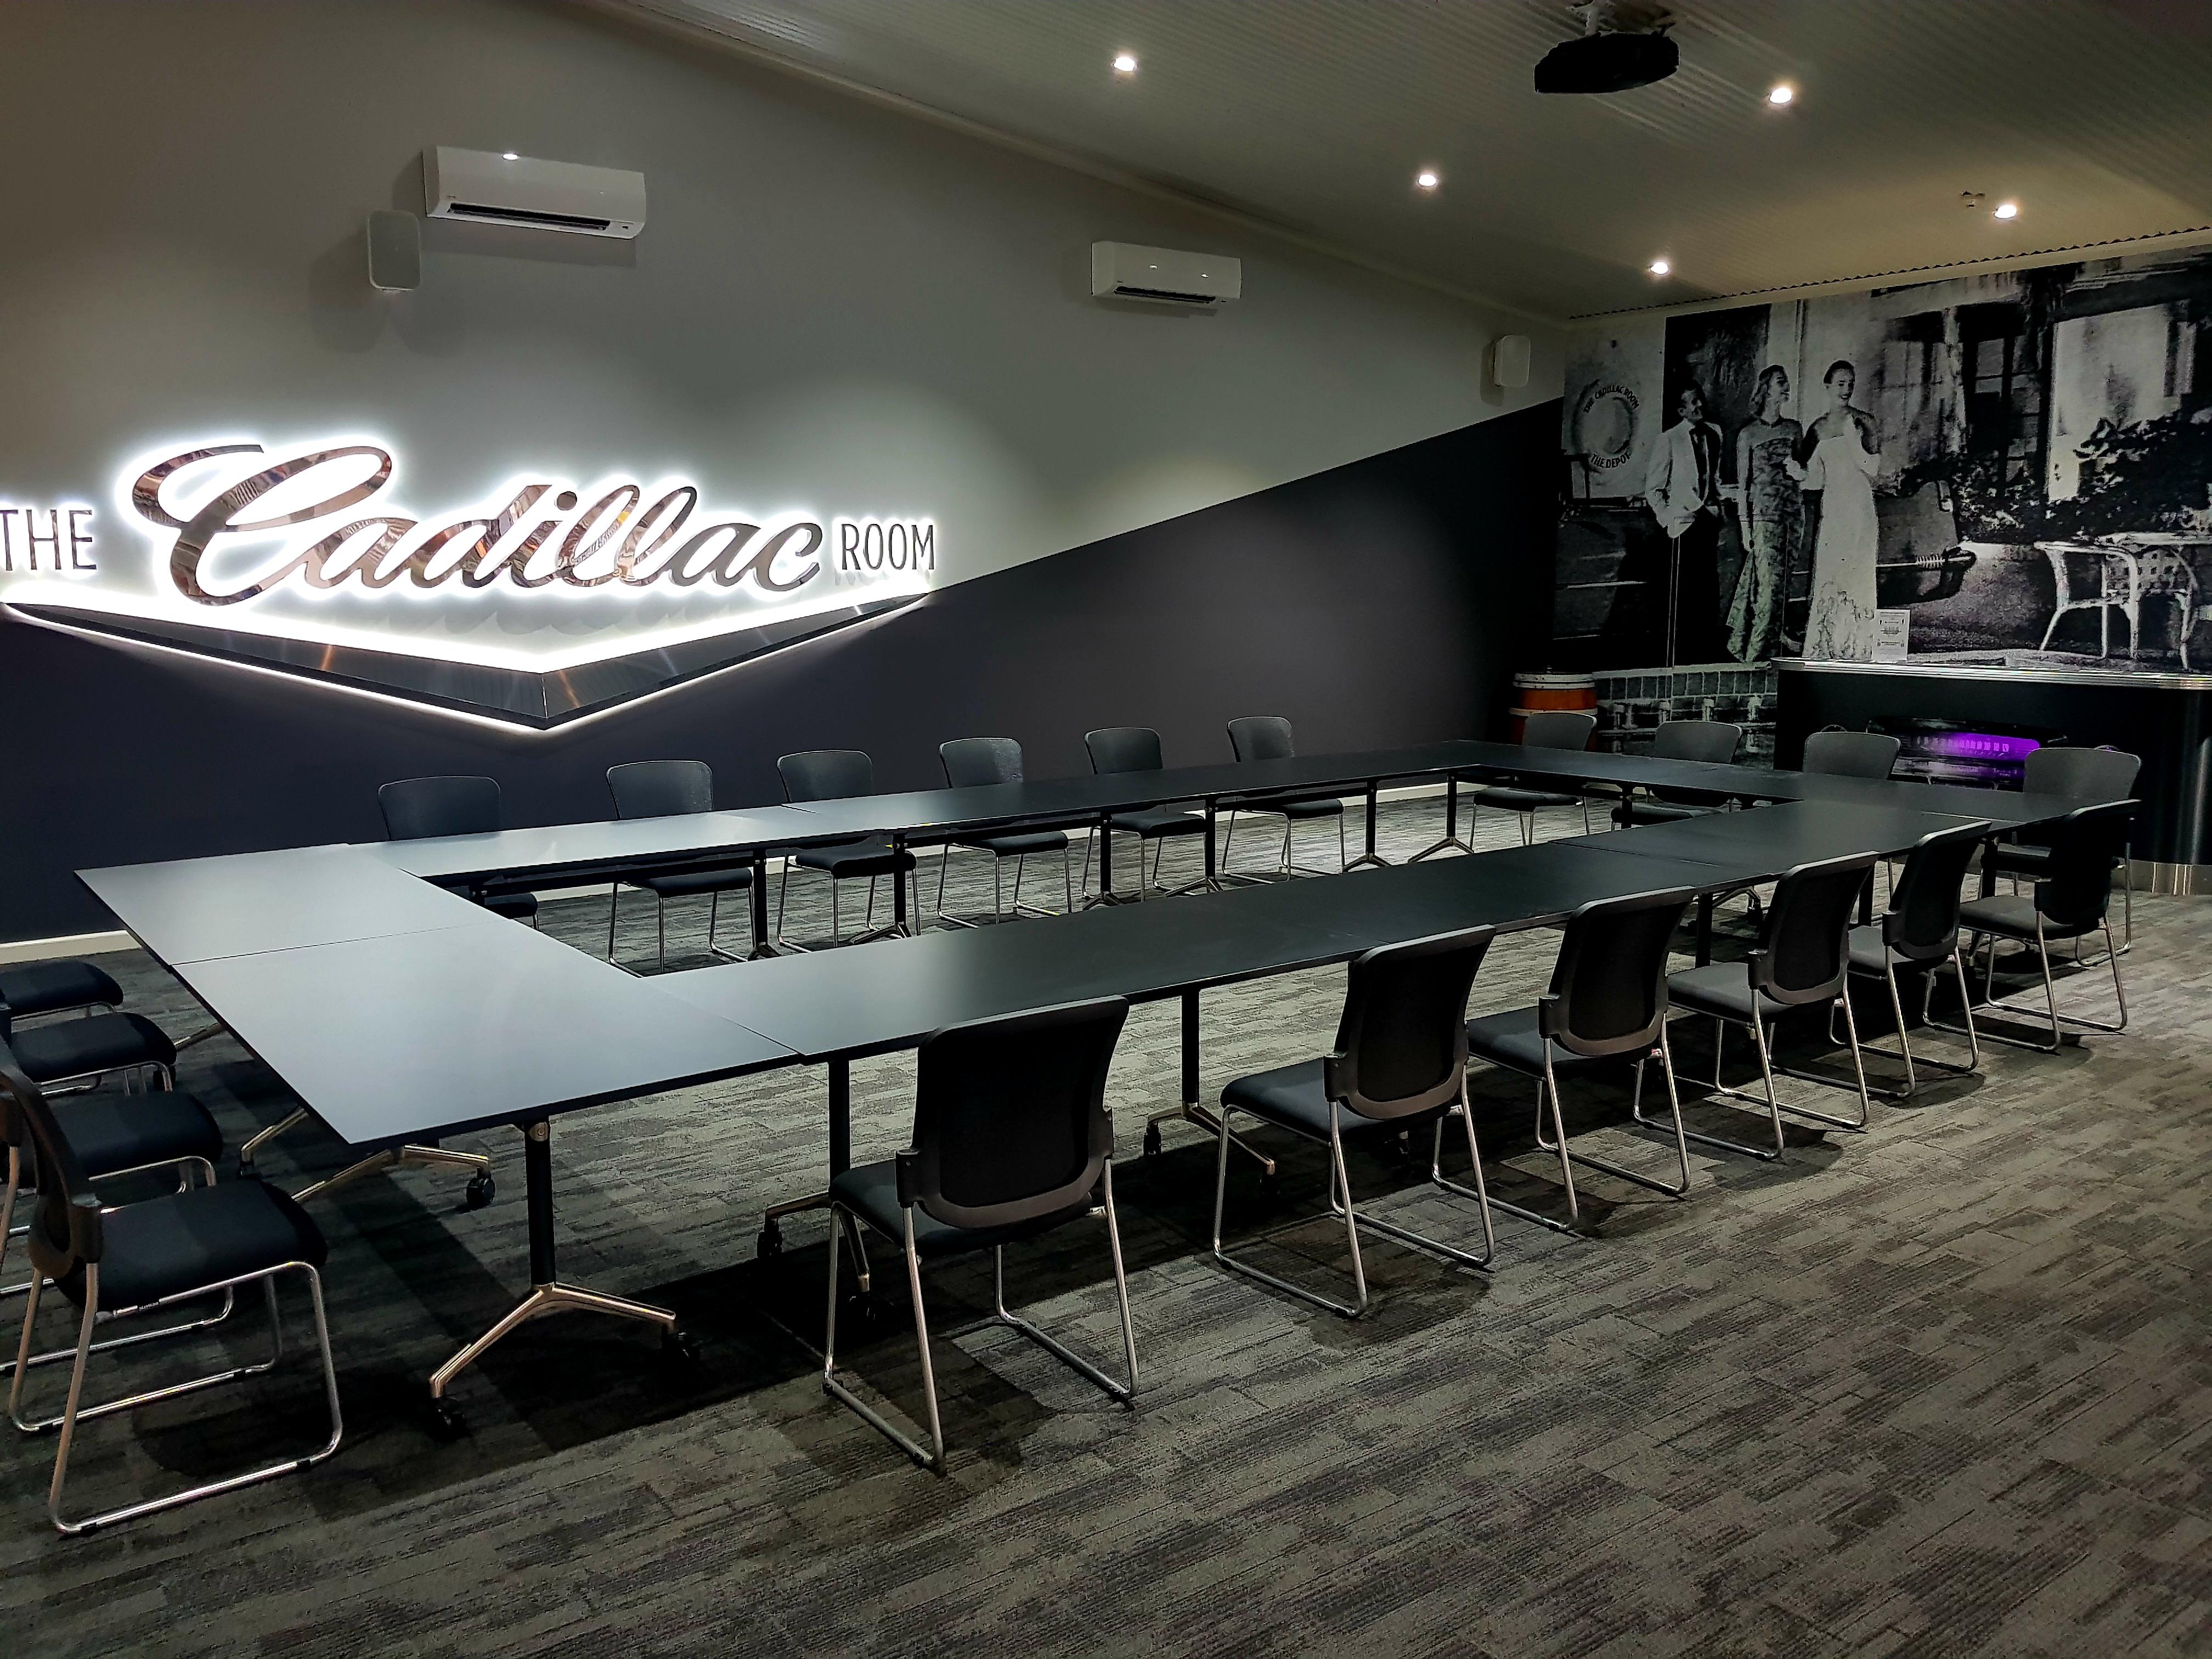 The Cadillac Room is a unique purpose built function facility.